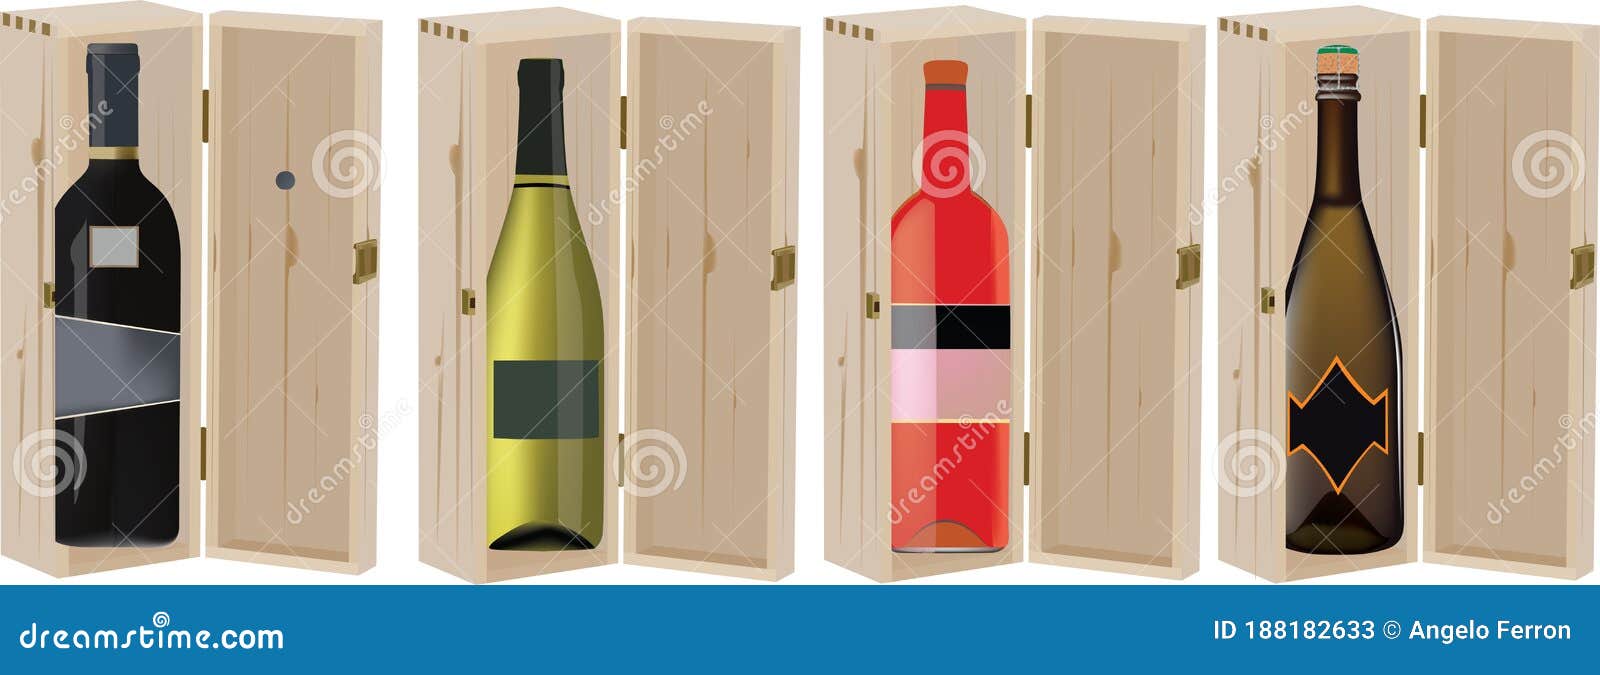 bottles of wines of different color with wooden packaging